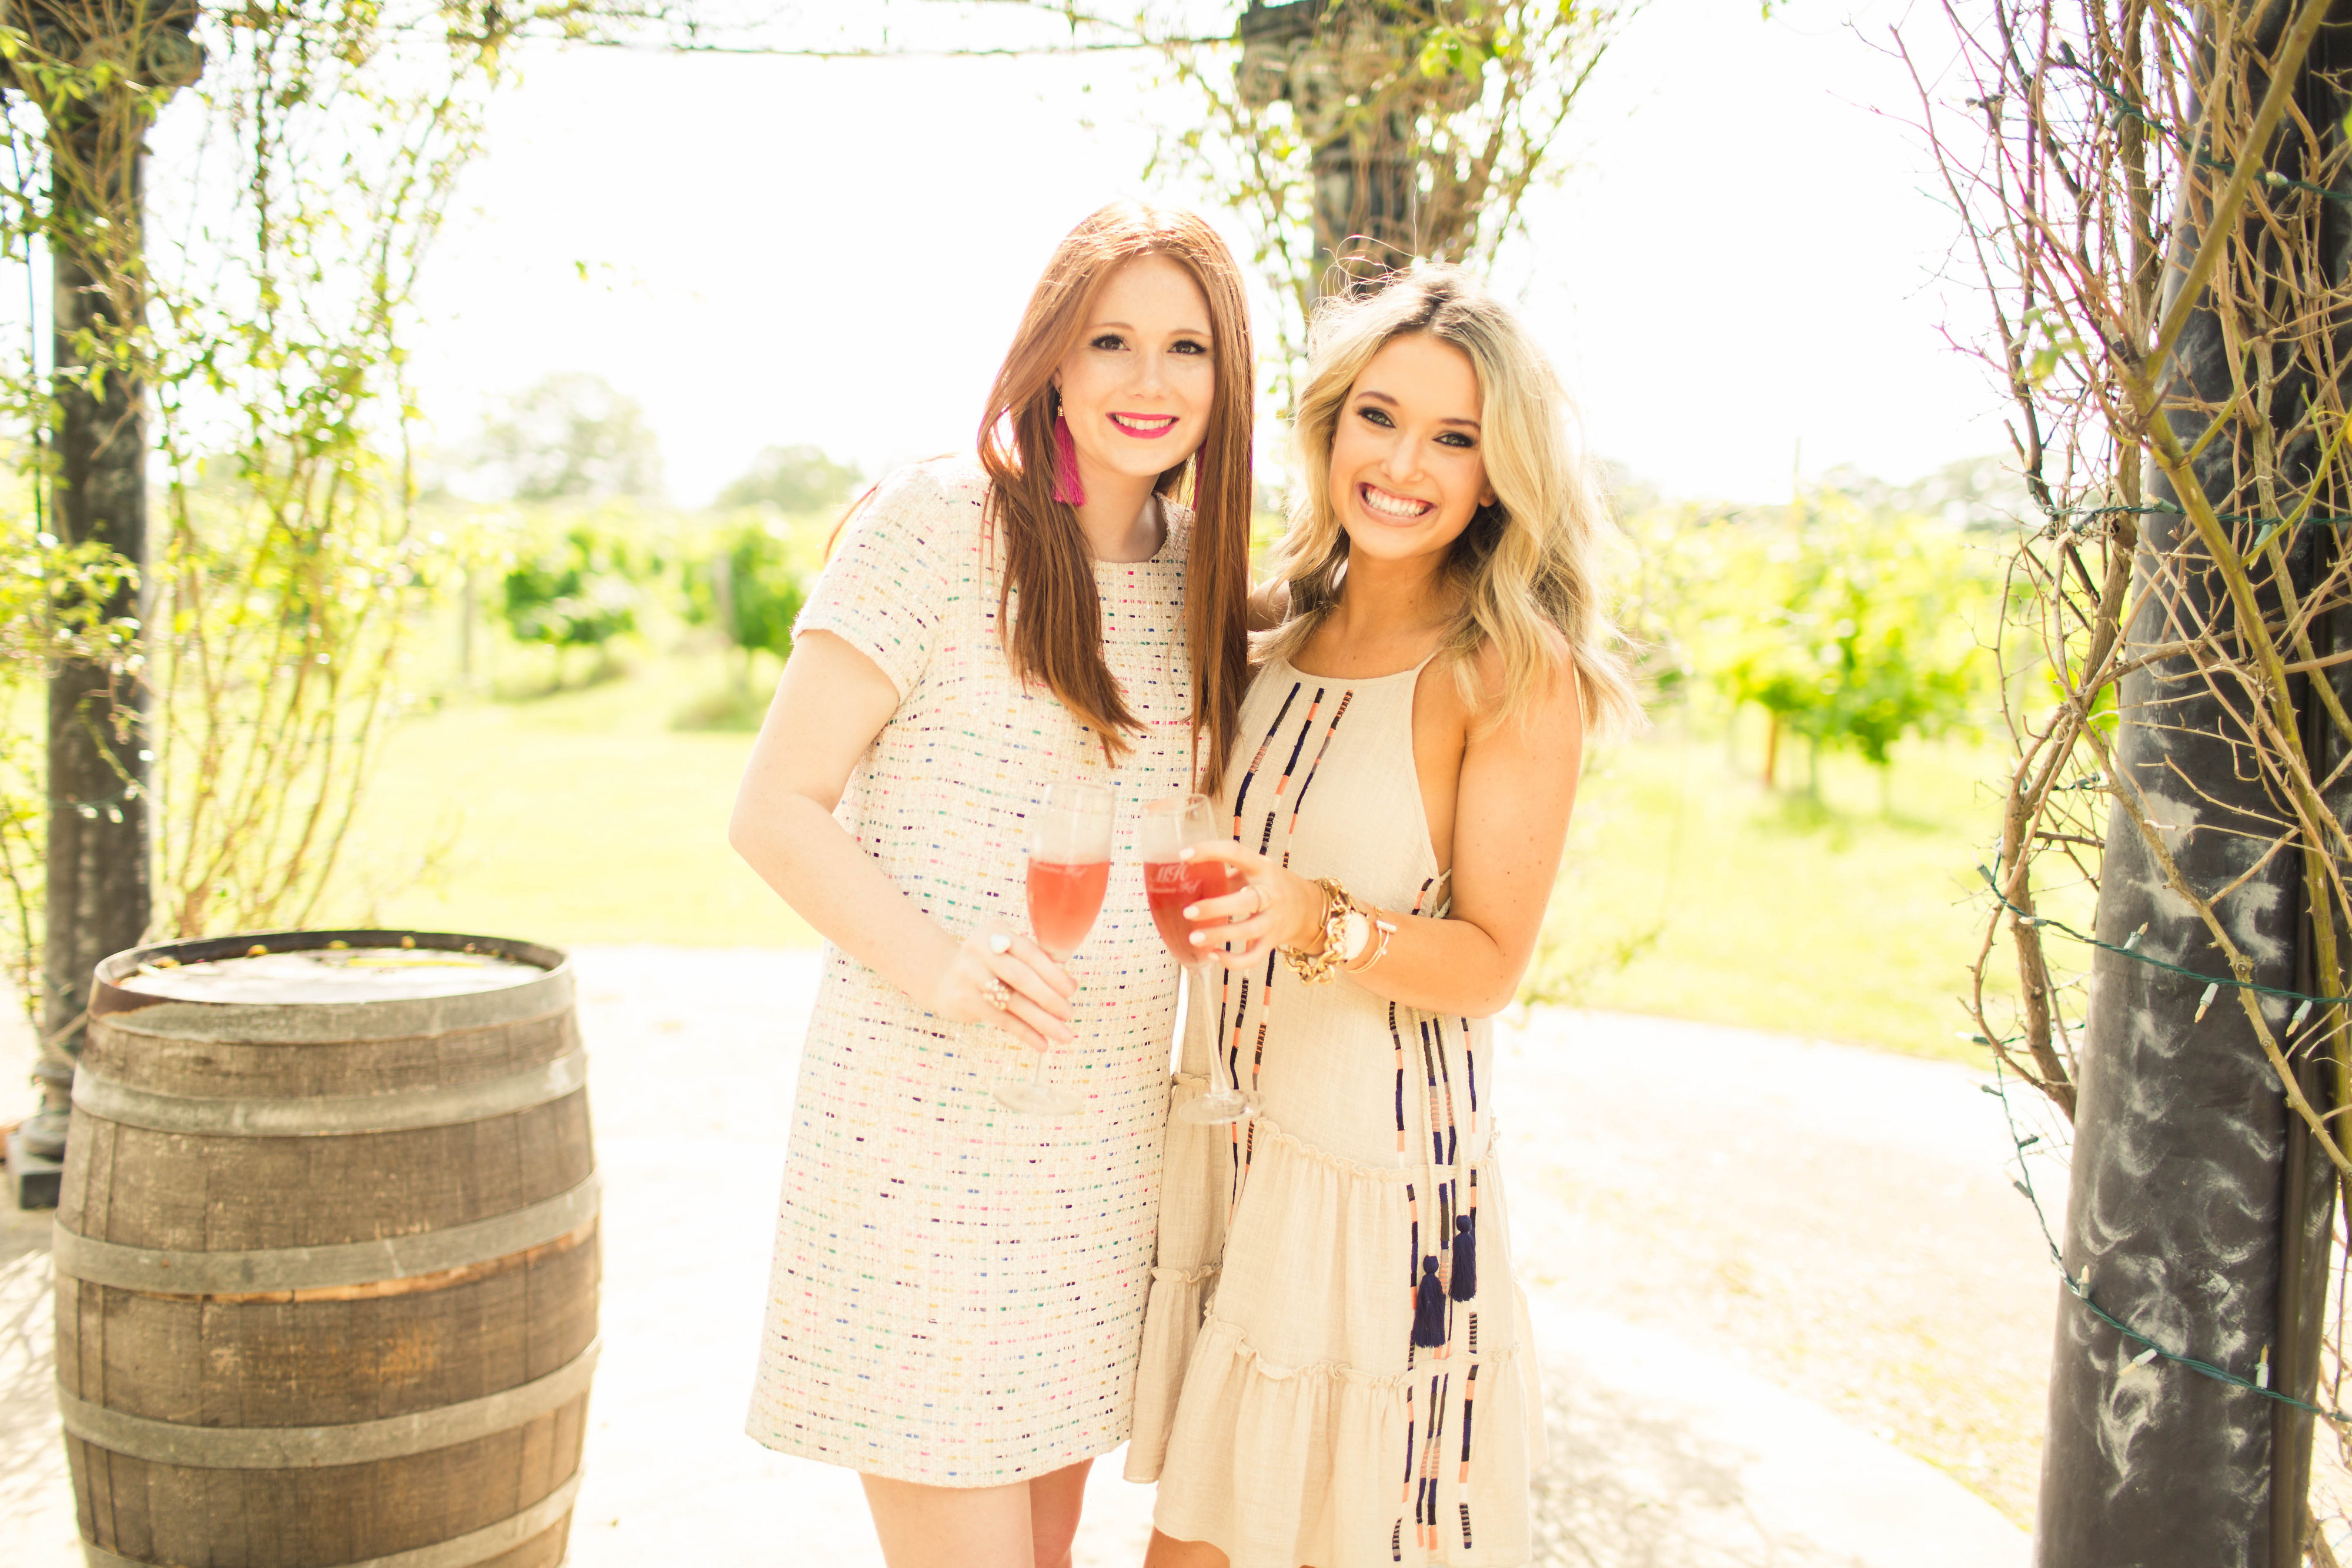 View More: http://wgilmerphotography.pass.us/mh-winery